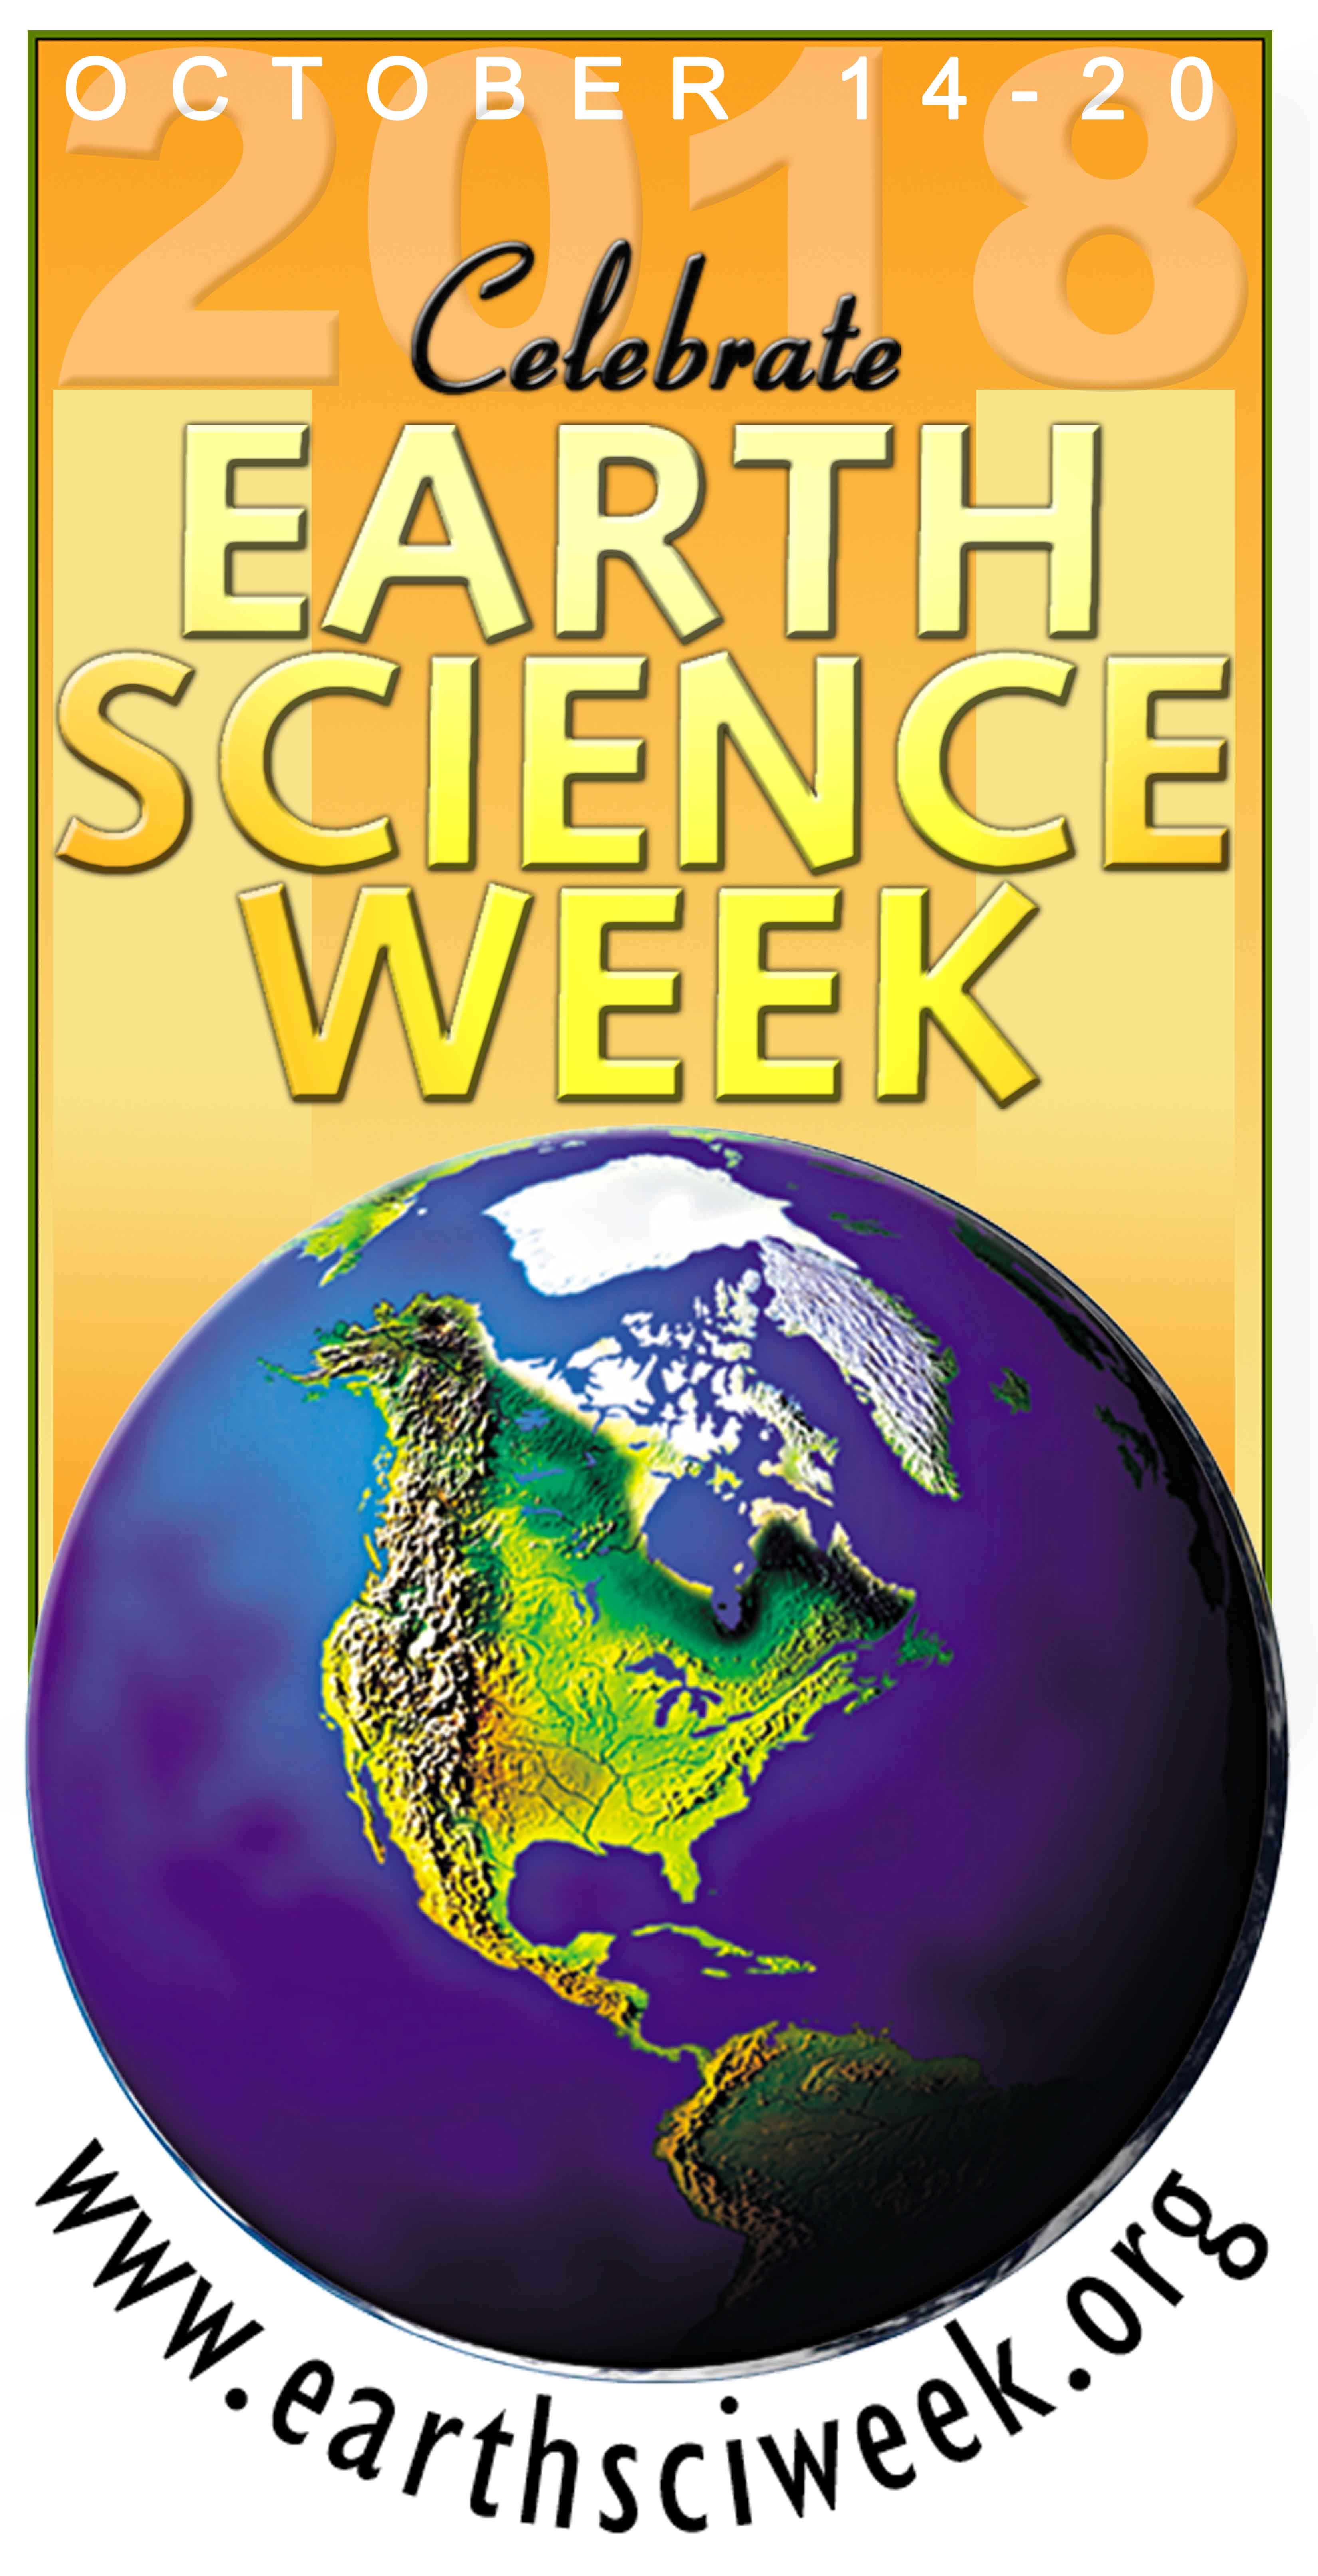 Science Globe Logo - Downloadable Images and Logos | Earth Science Week